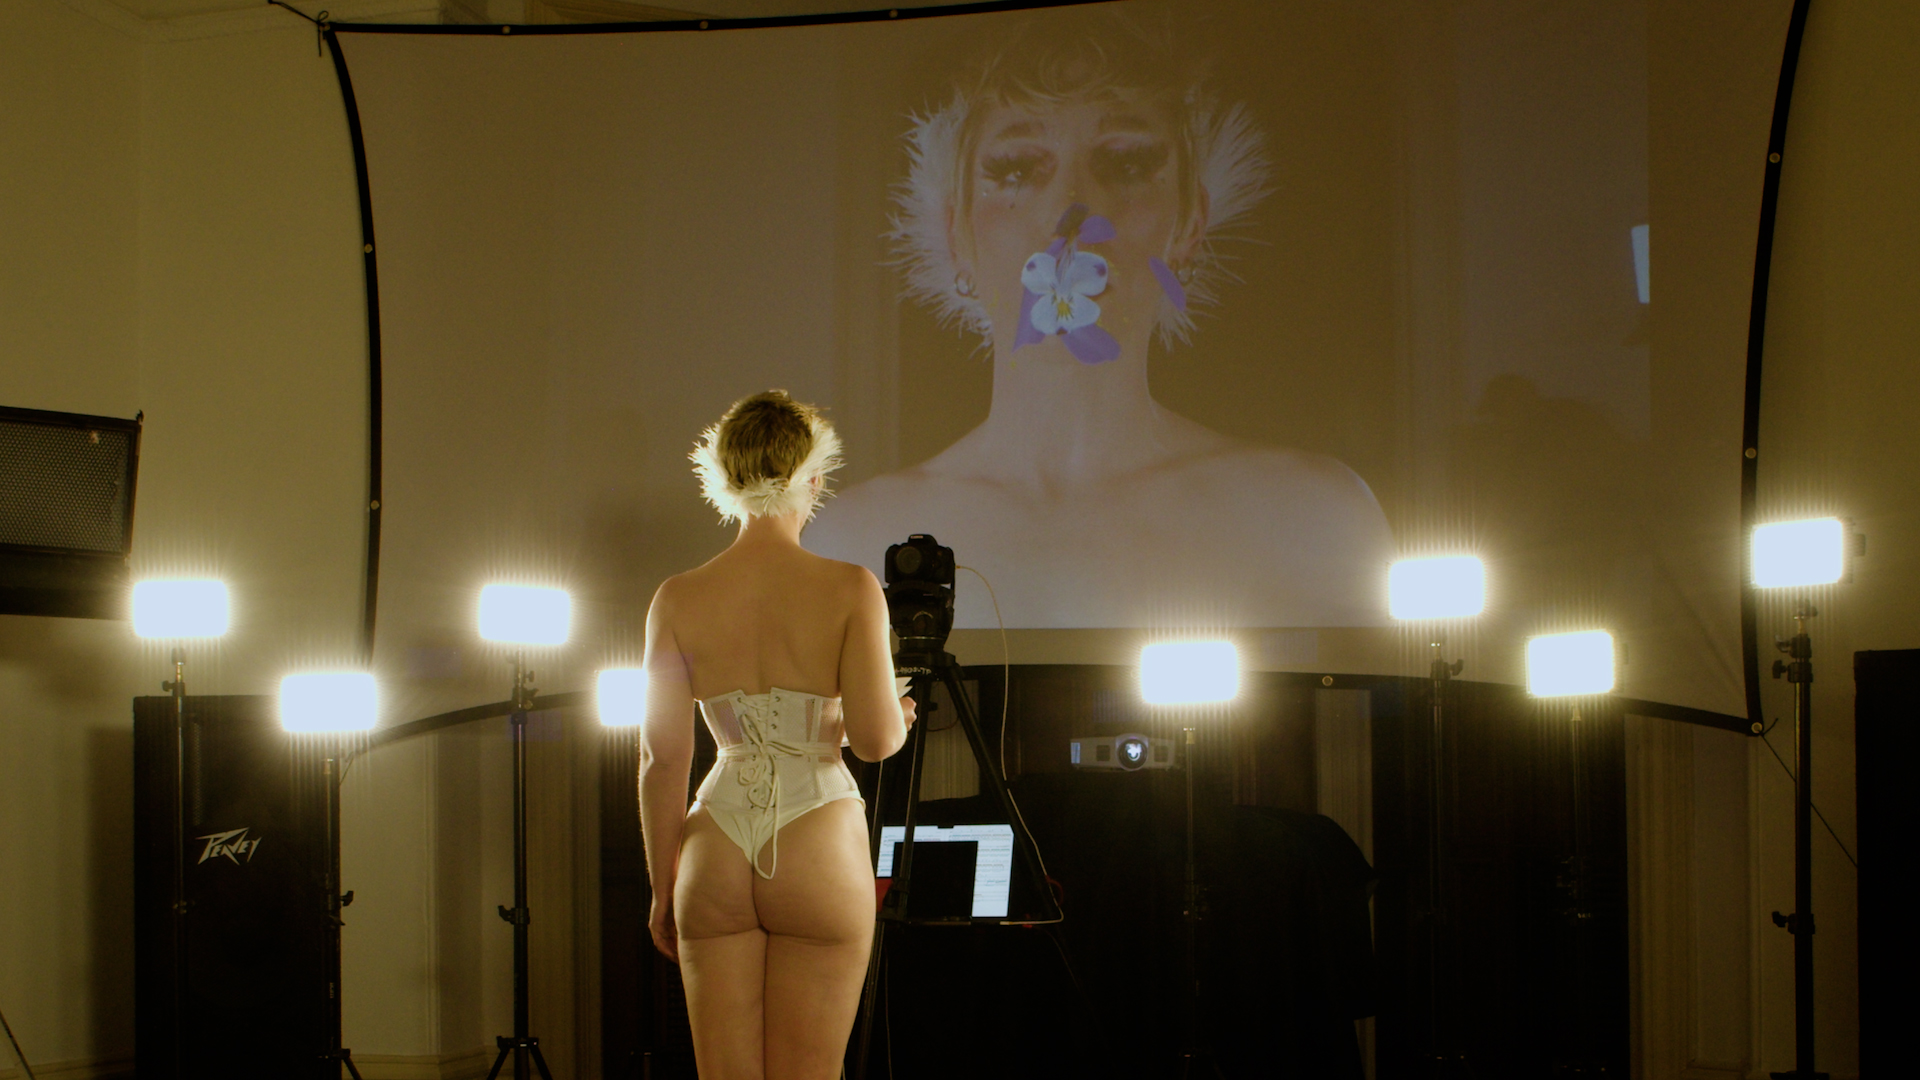 Image: Bun Stout performs “The Swan” at PS1 Close House. A performer wearing a white corset and underwear poses in front of a projector screen with their back turned toward the camera. Their arms are lifted above their head and are flexing, displaying the rippled muscles of their back. A line of unlit lights is arranged in front of the projector screen. A luminous sphere is displayed on the projector screen. Photo courtesy of the artist.